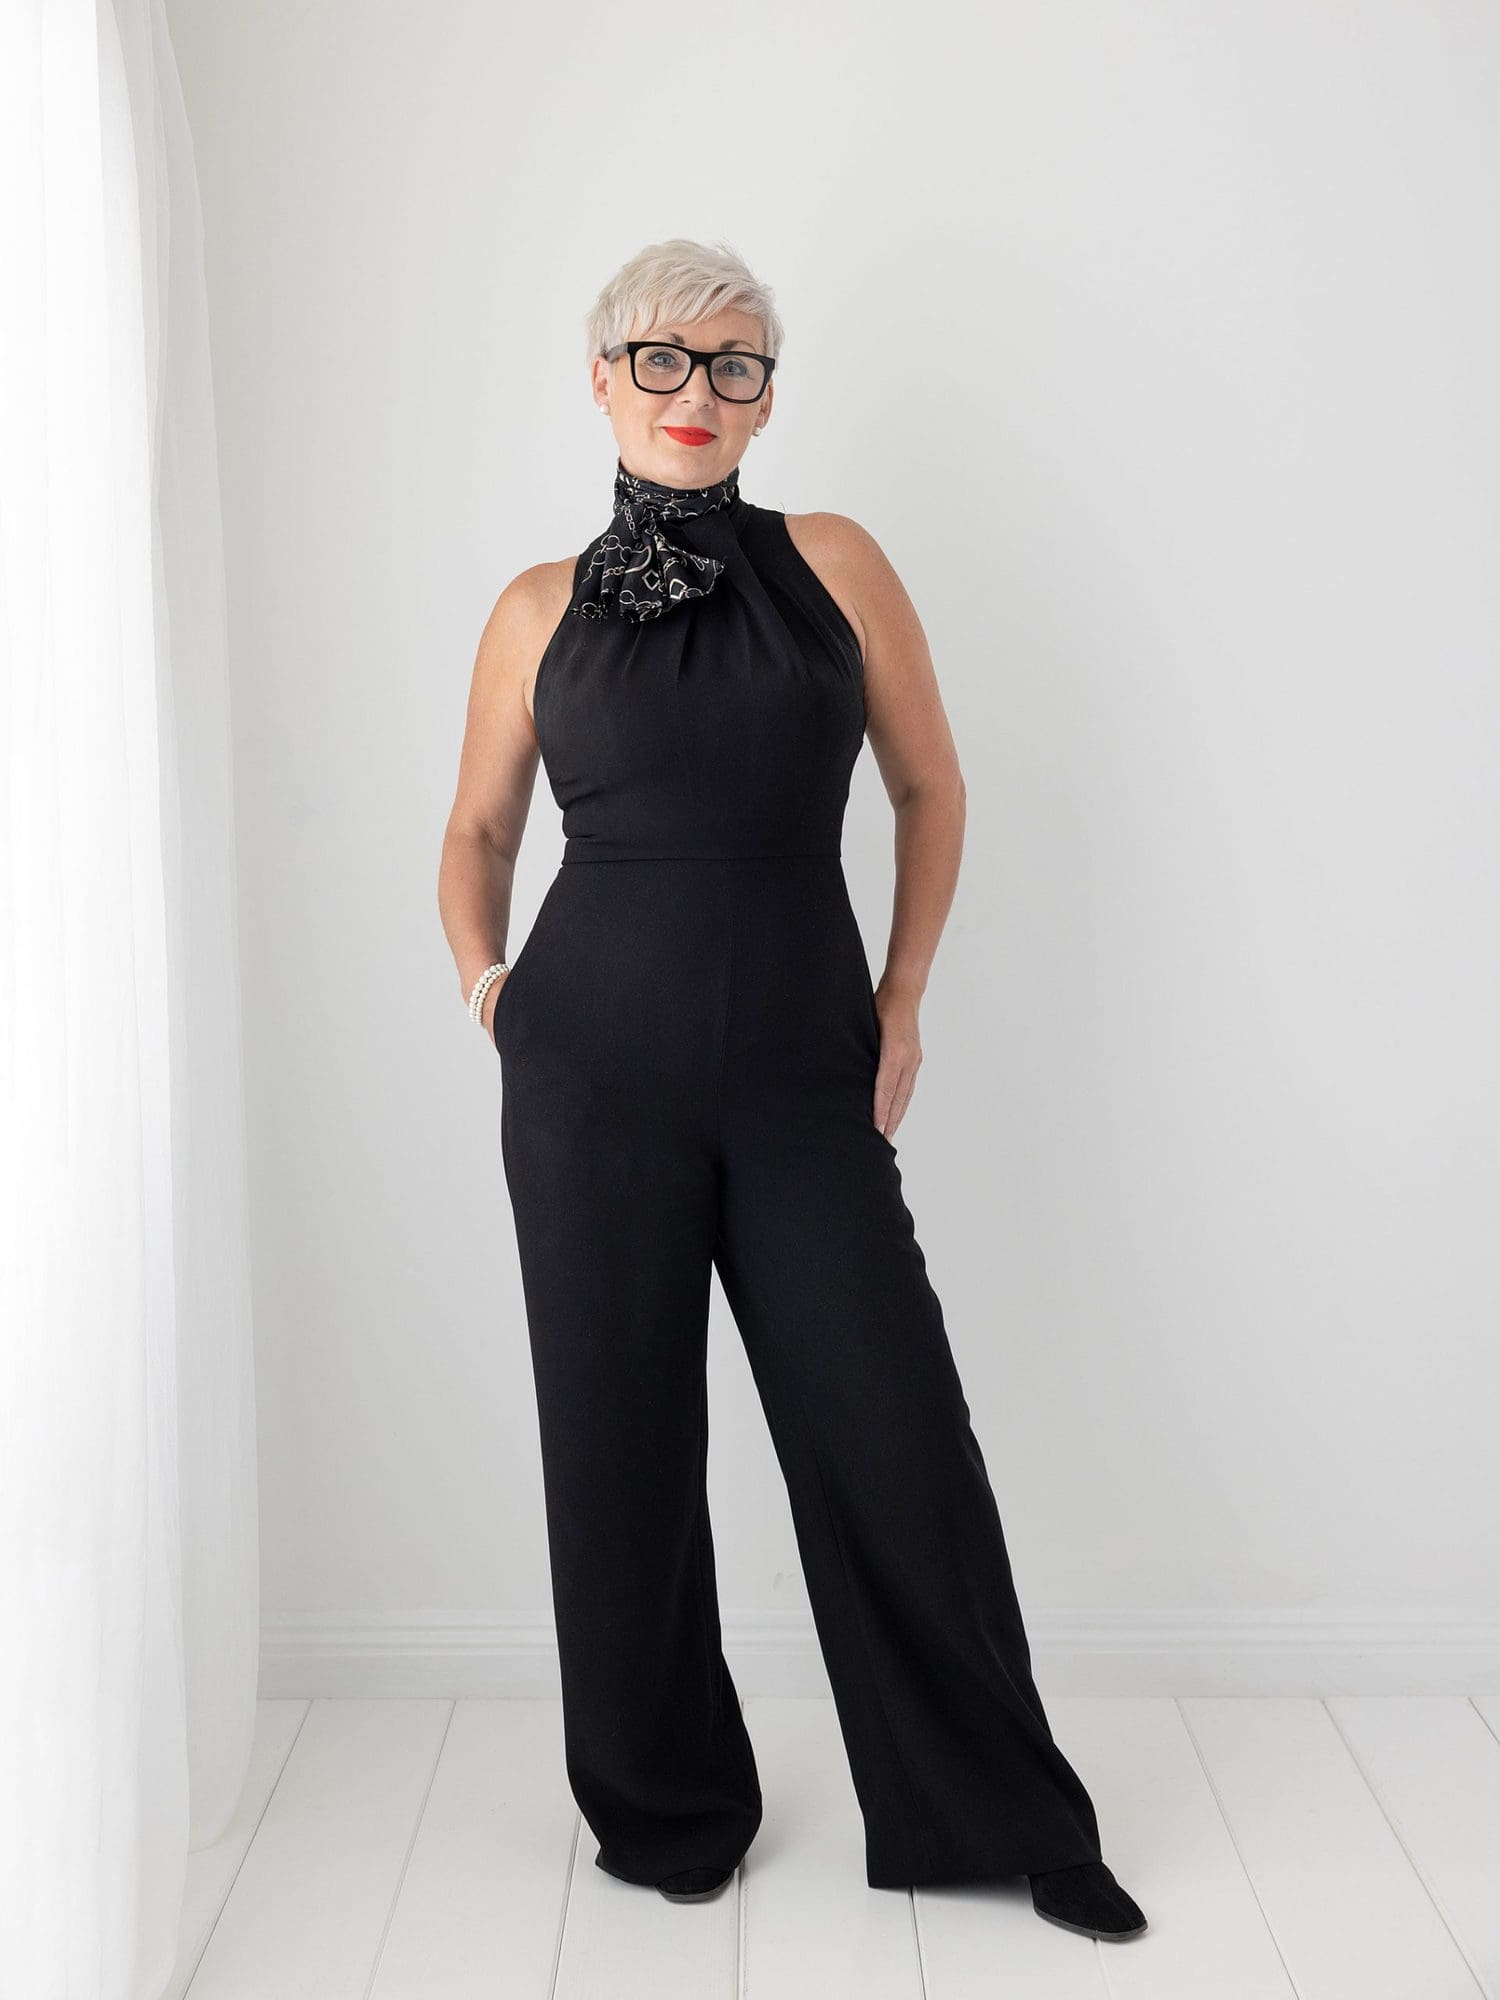 Beautiful woman with short grey hair posing for her Beauty Shoot against a white backdrop wearing a black jumpsuit in Suffolk Studio